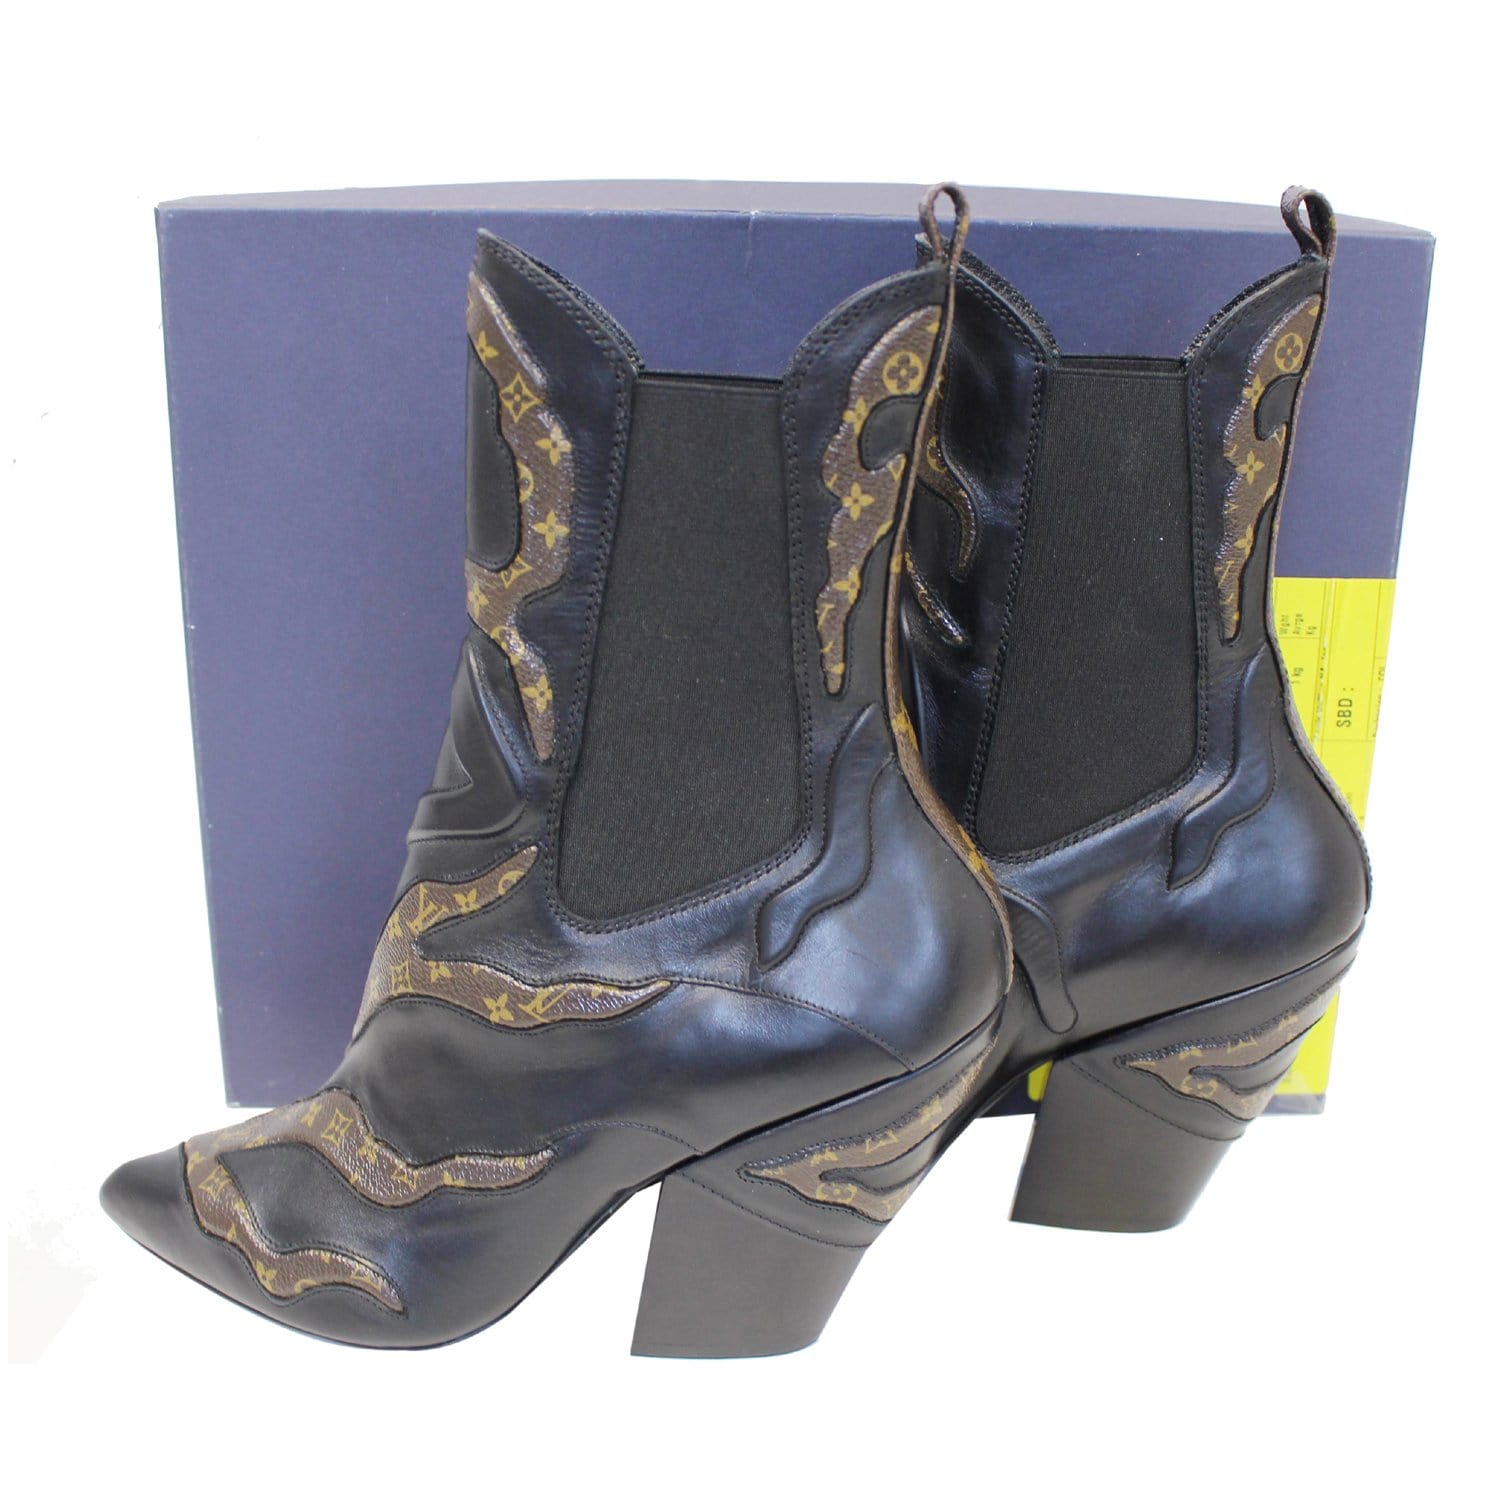 Louis Vuitton Ankle boots for Sale in Online Auctions